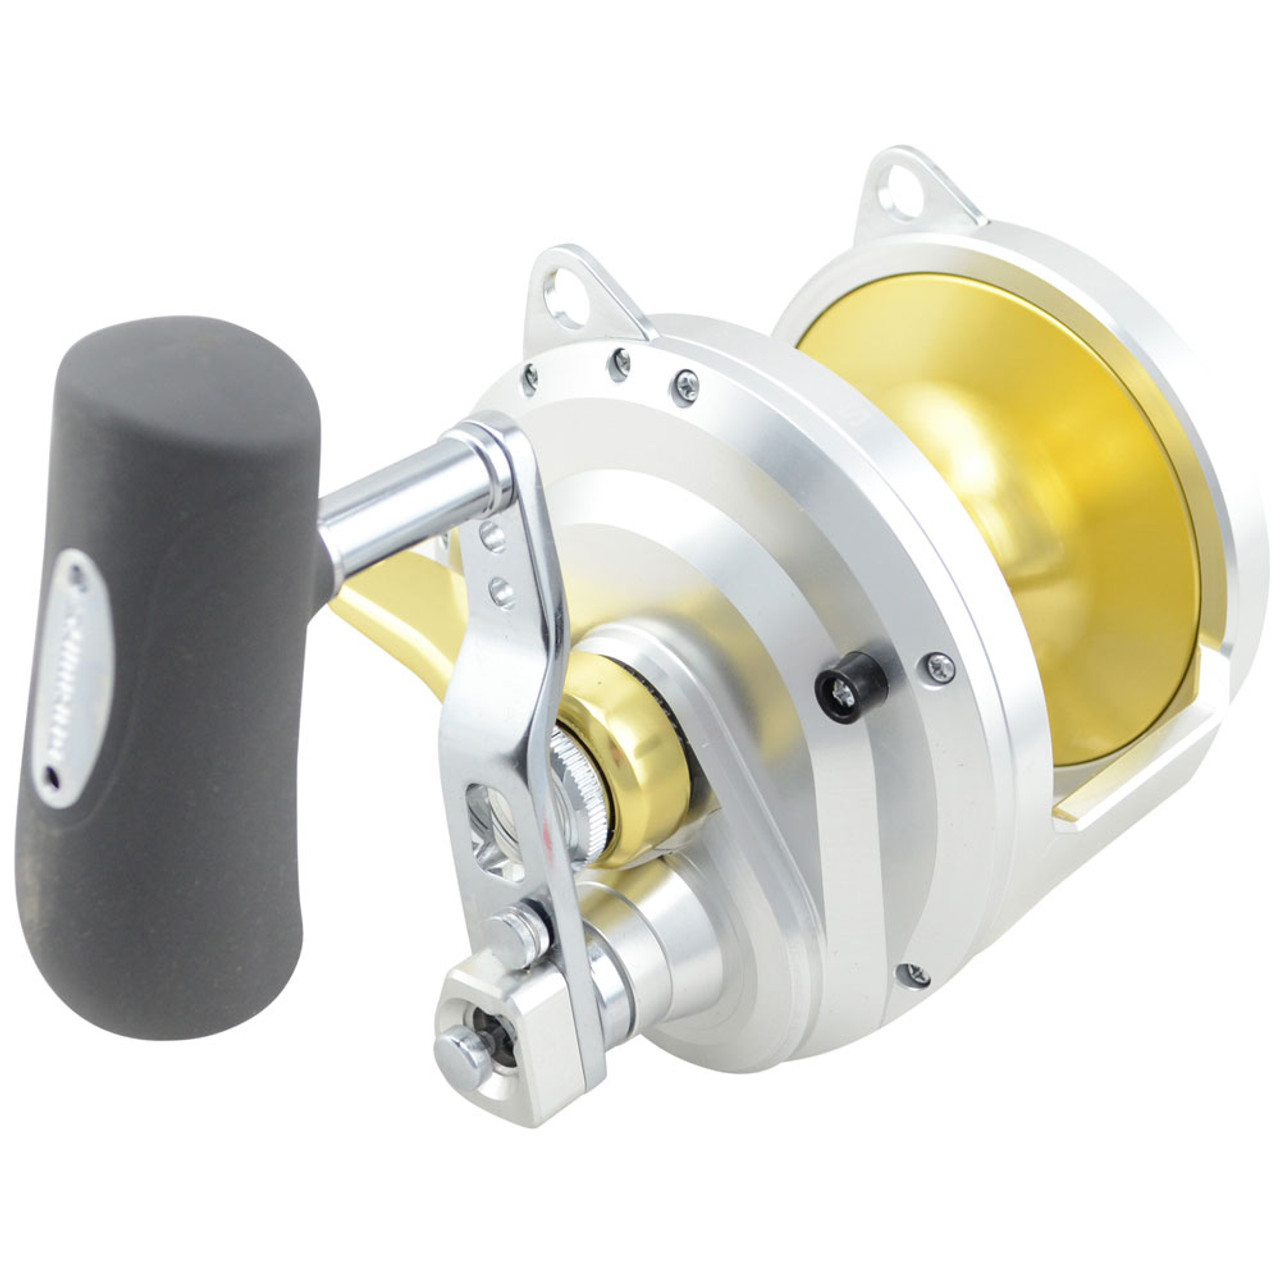 Find Opening Sales Shimano Talica Fishing Reel TAC50 2 Speed get